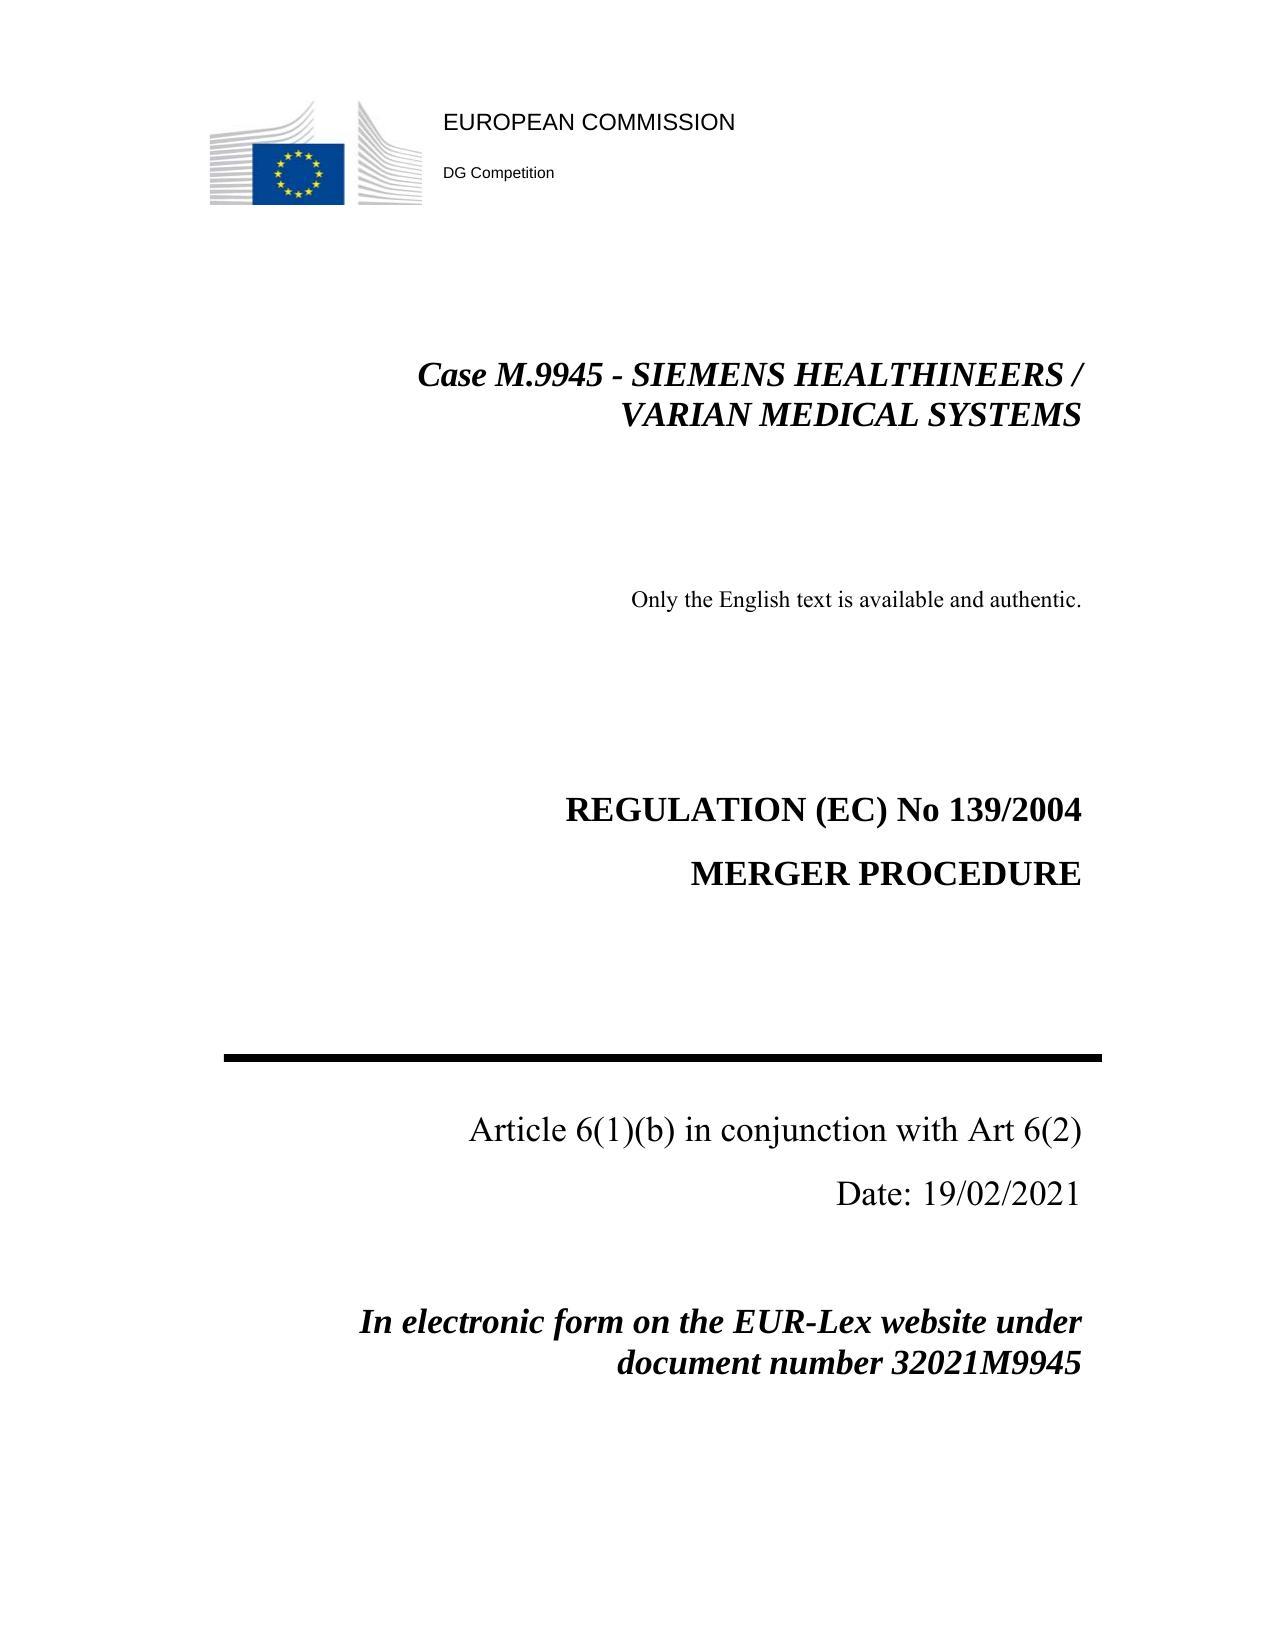 case-m9945-siemens-healthineers-varian-medical-systems-commission-decision.pdf